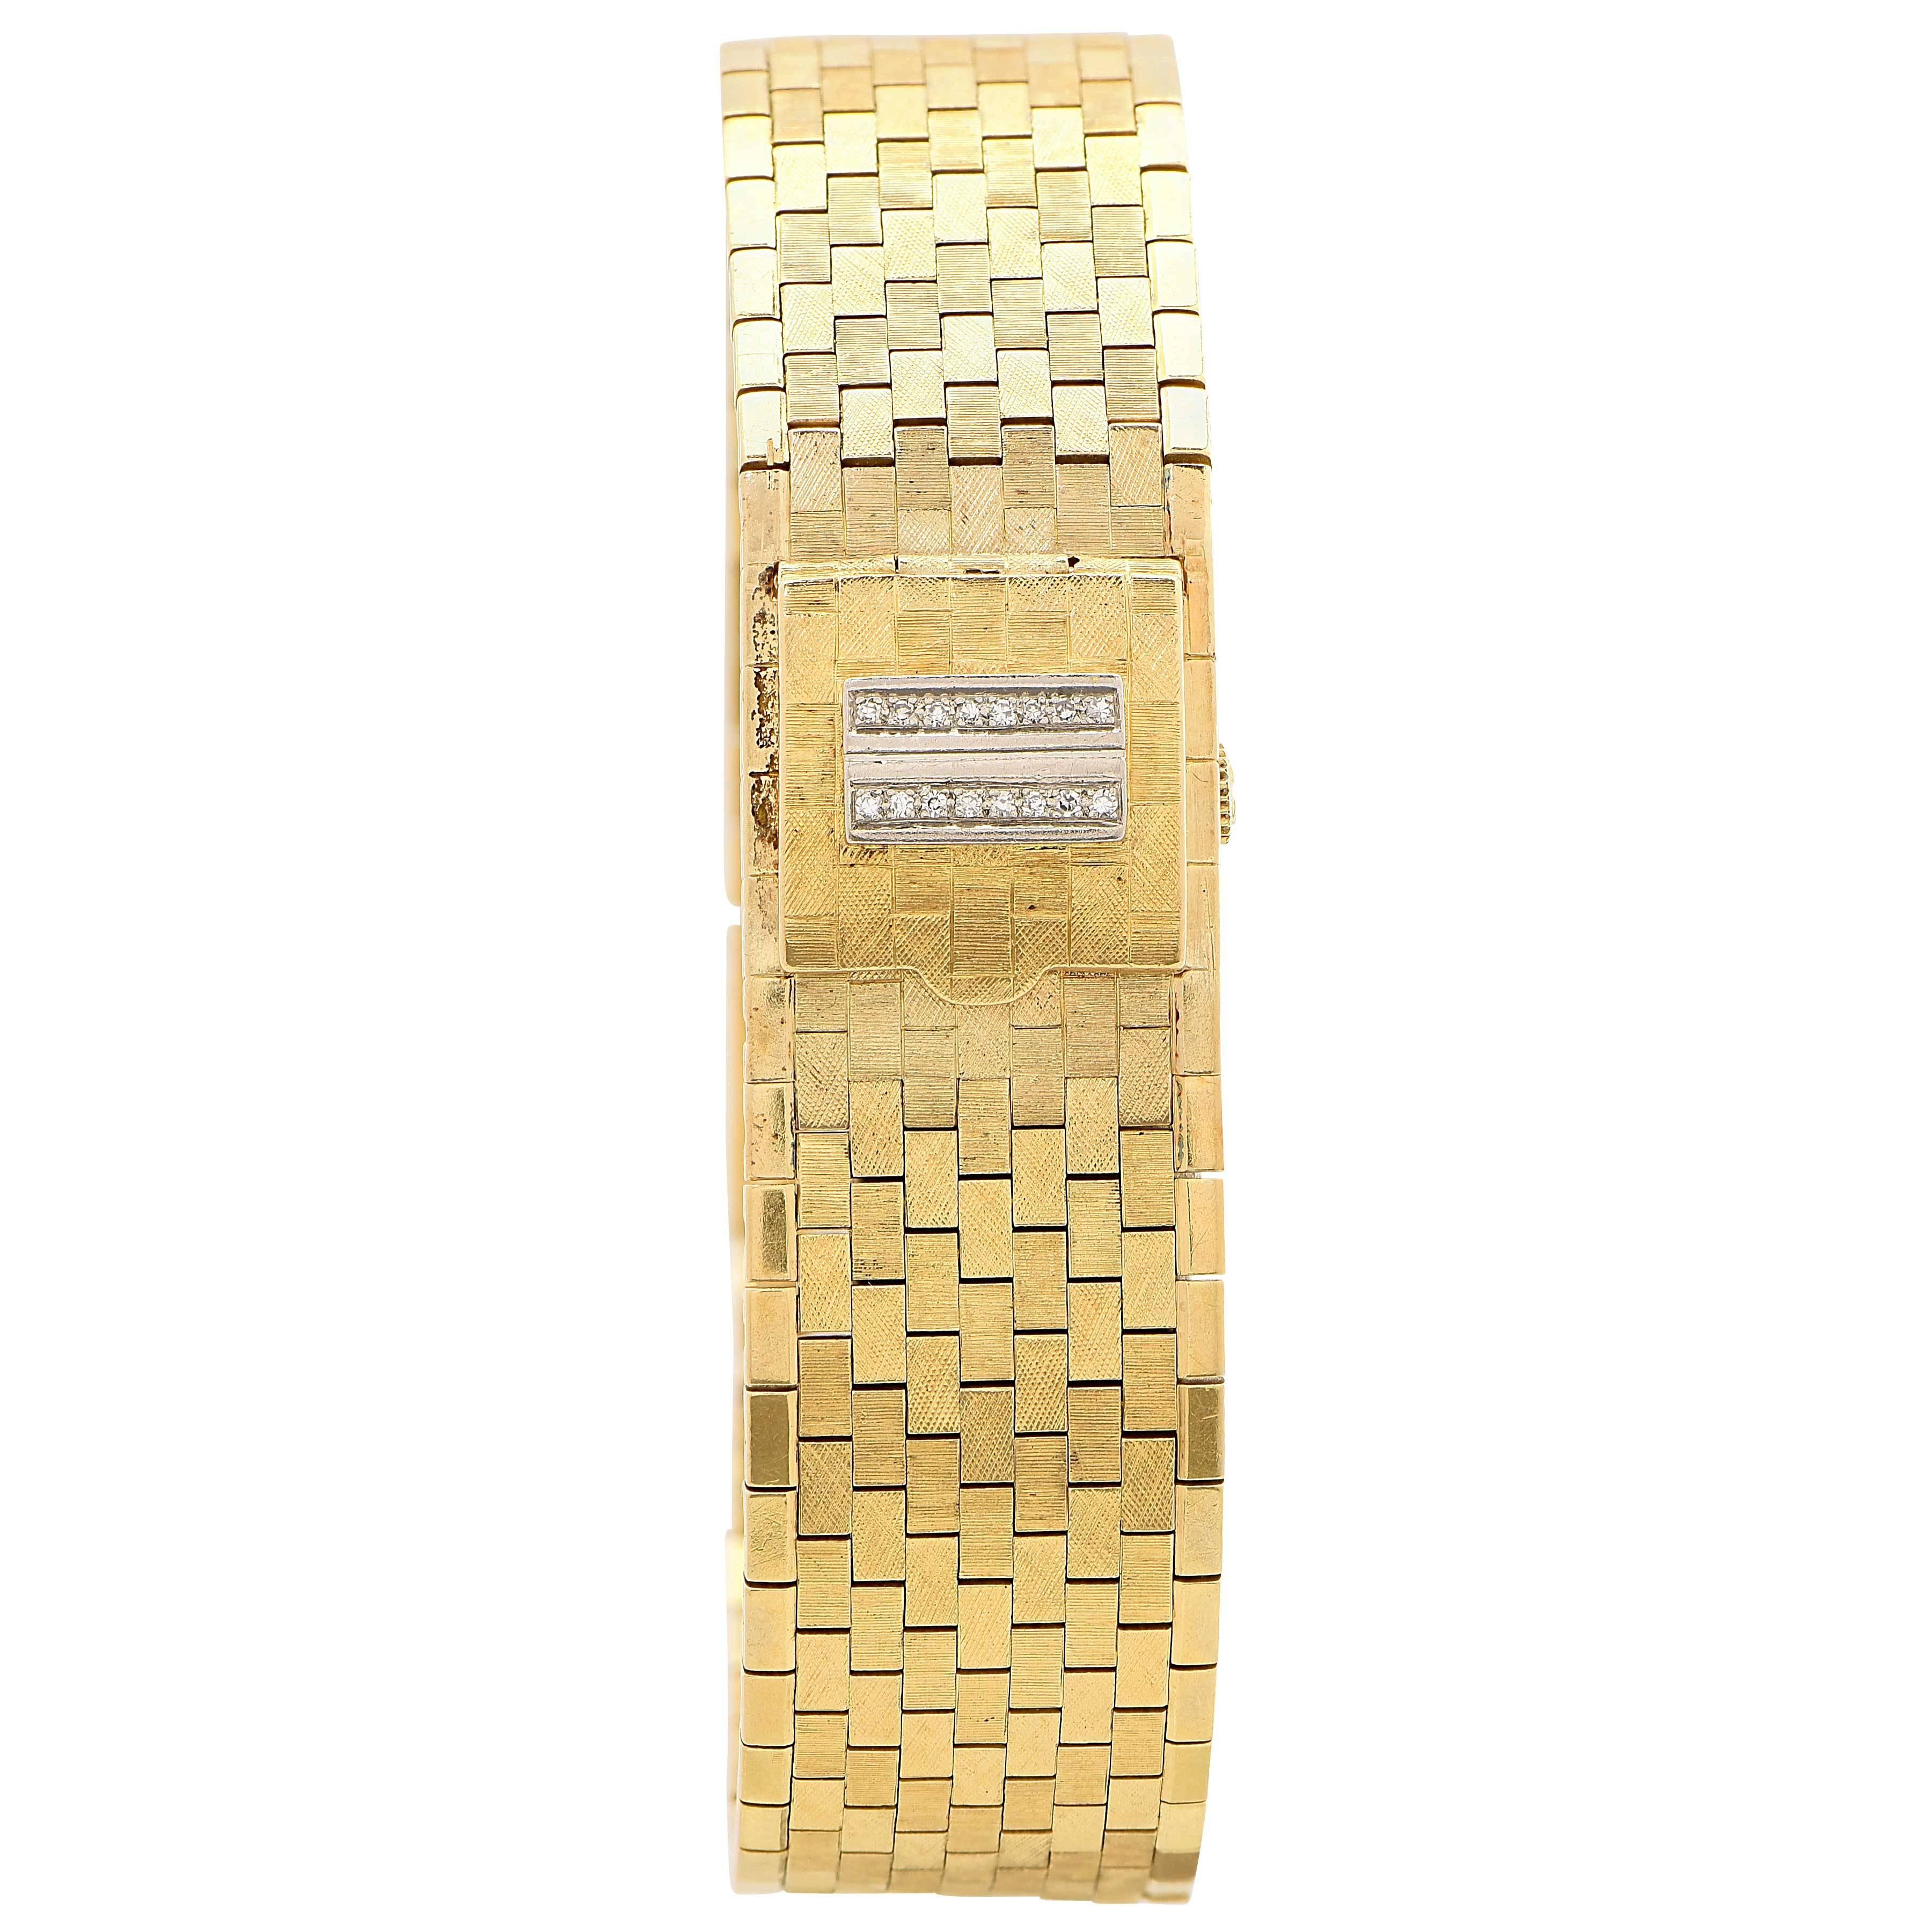 Lady's Rolex 18 Karat Yellow Gold Watch. 
This interesting watch features 16 single cut diamonds with an estimated total weight of .08 carats on its cover.
Metal: 18 Karat Yellow Gold Tested
Metal Weight: 61.8 grams